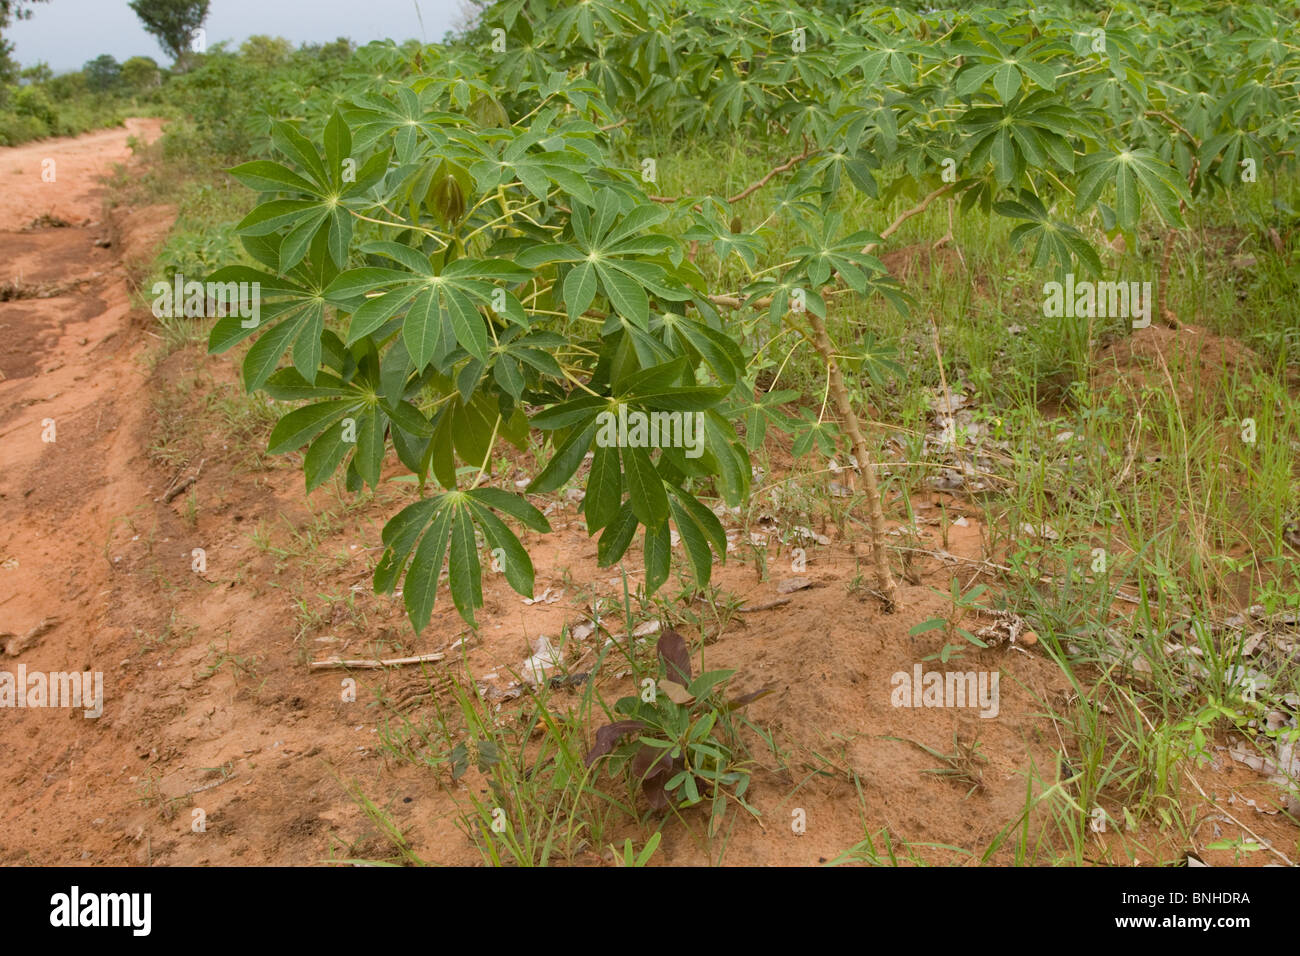 Cassava plants cultivated in the Gonja triangle, Ghana. Stock Photo